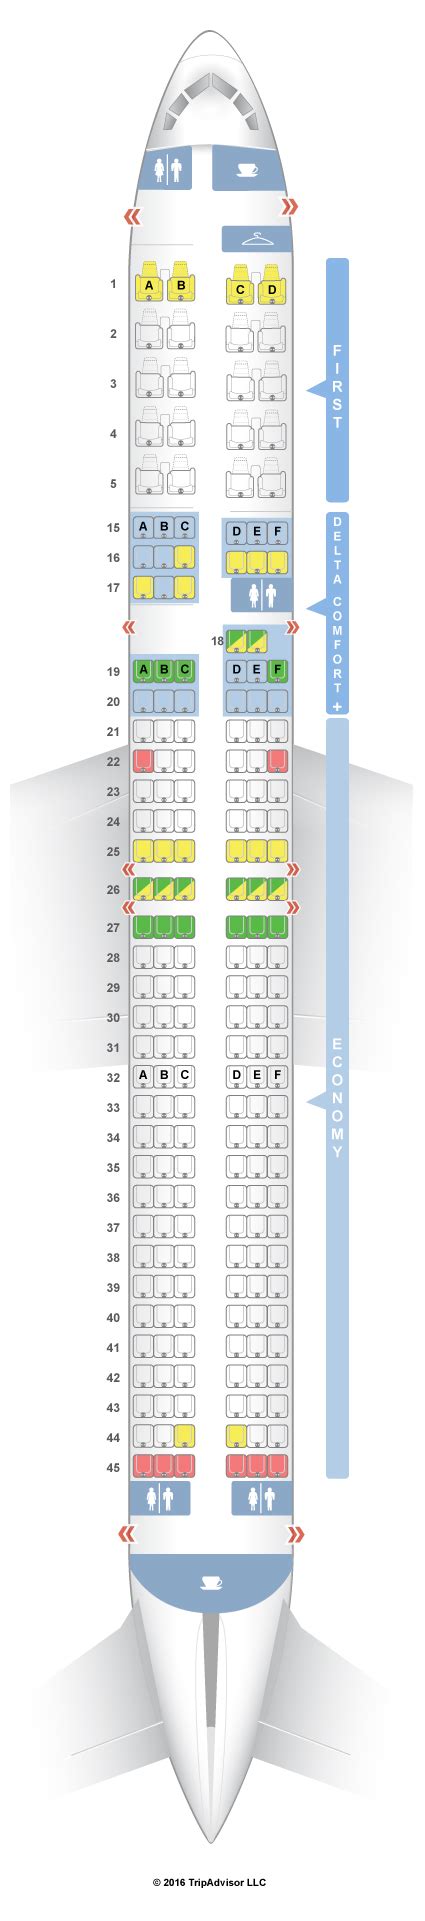 For your next Delta flight, use this seating chart to get the most com